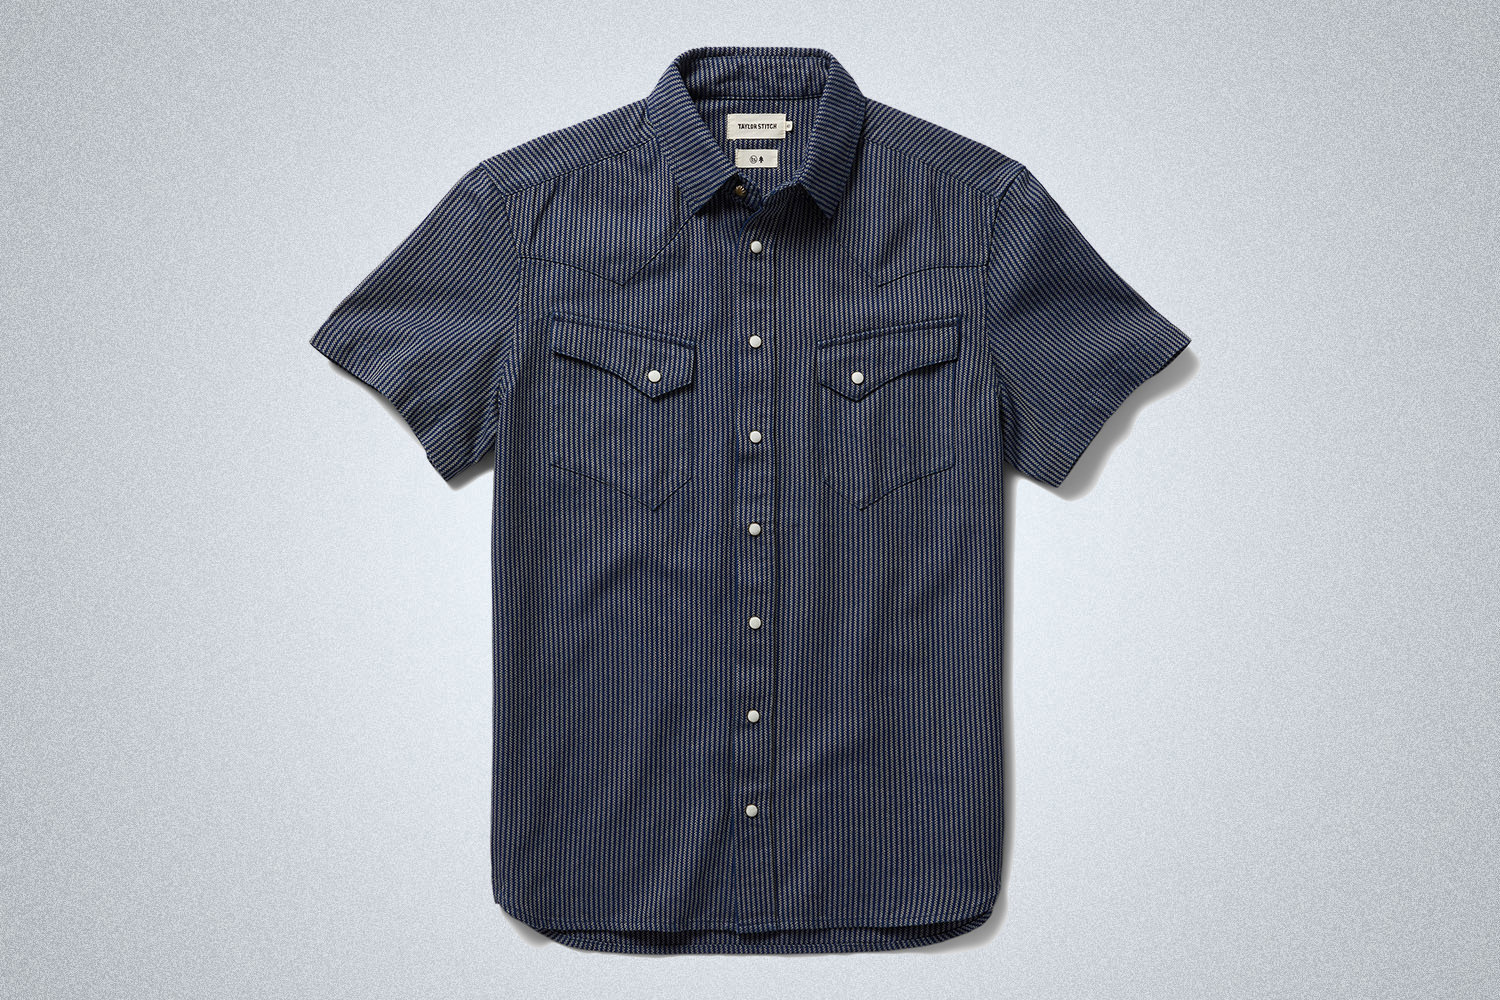 The men's Western Roped Indigo Shirt from Huckberry and Taylor Stitch